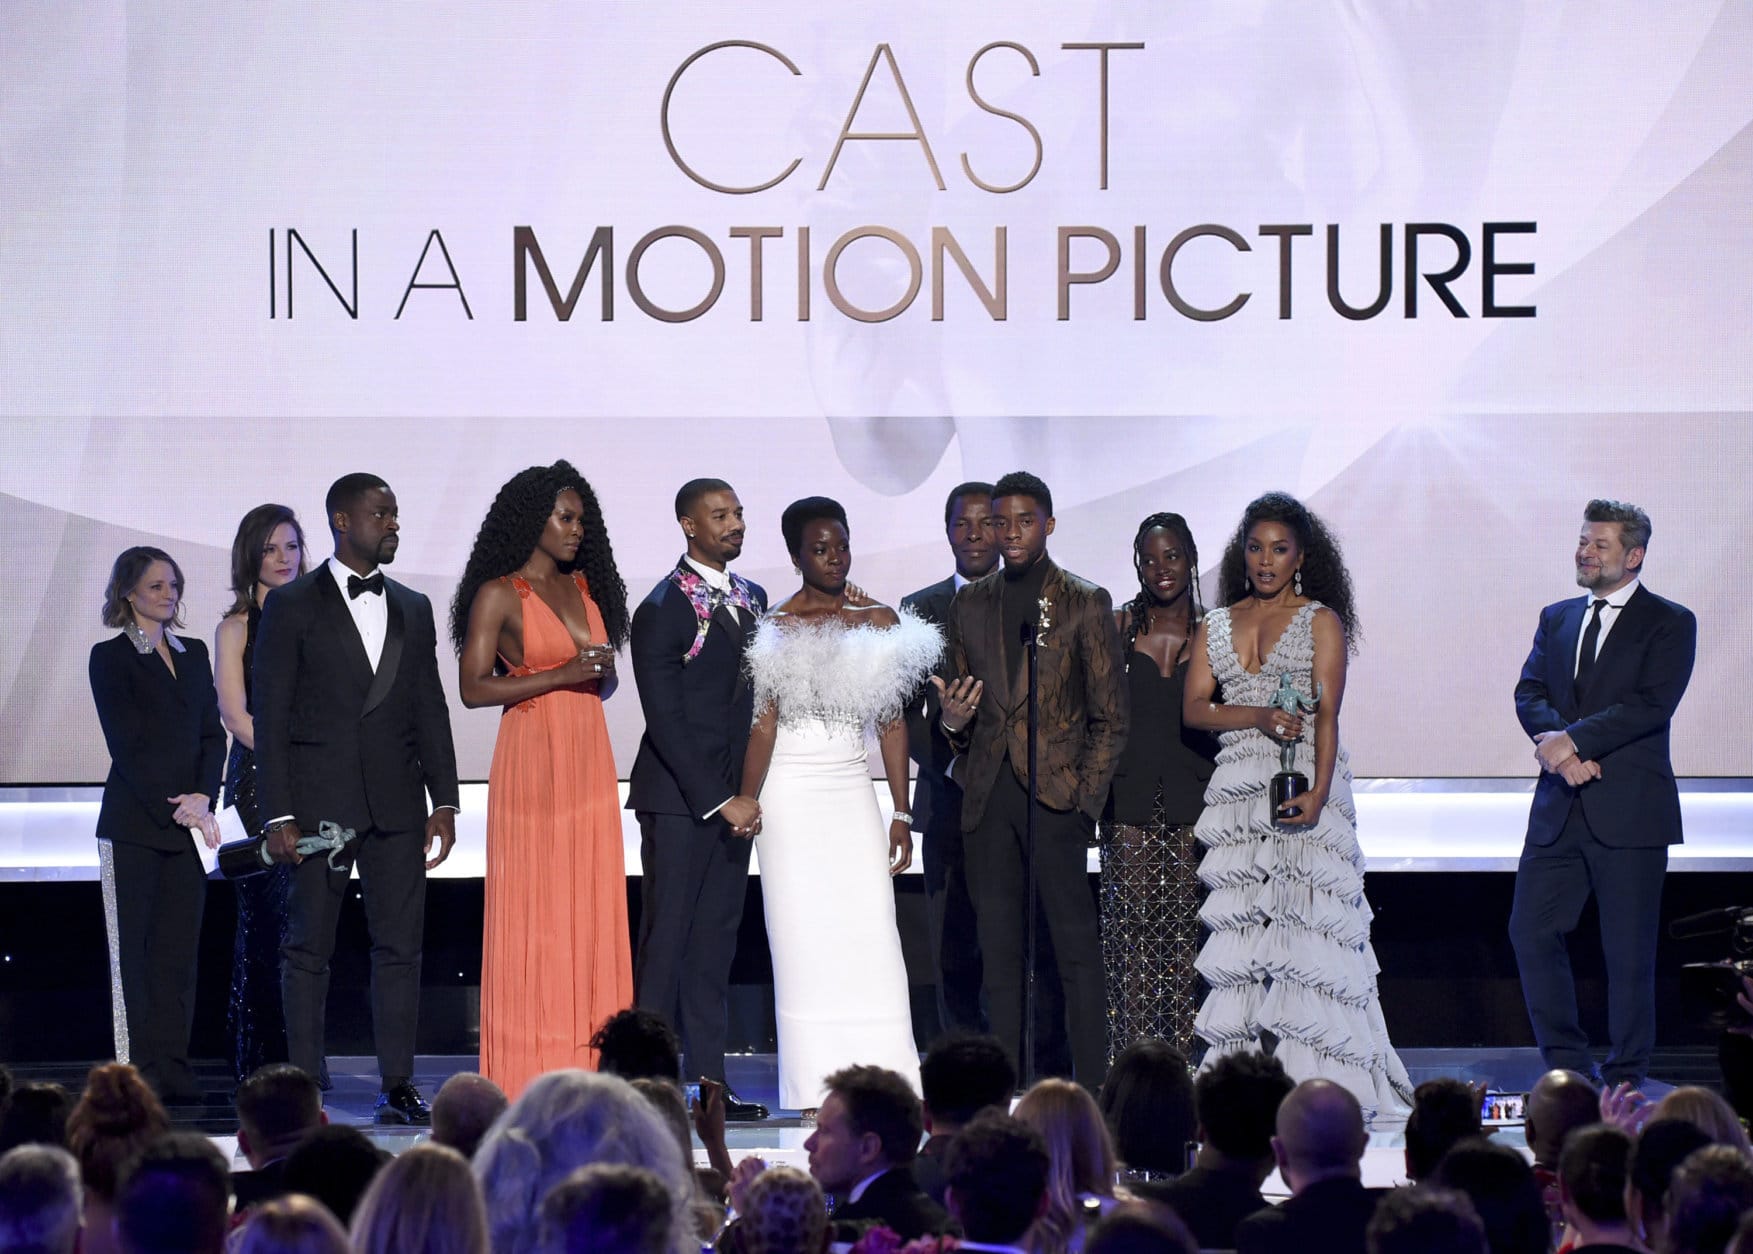 The cast of "Black Panther," accept the award for outstanding performance by a cast in a motion picture at the 25th annual Screen Actors Guild Awards at the Shrine Auditorium &amp; Expo Hall on Sunday, Jan. 27, 2019, in Los Angeles. (Photo by Richard Shotwell/Invision/AP)